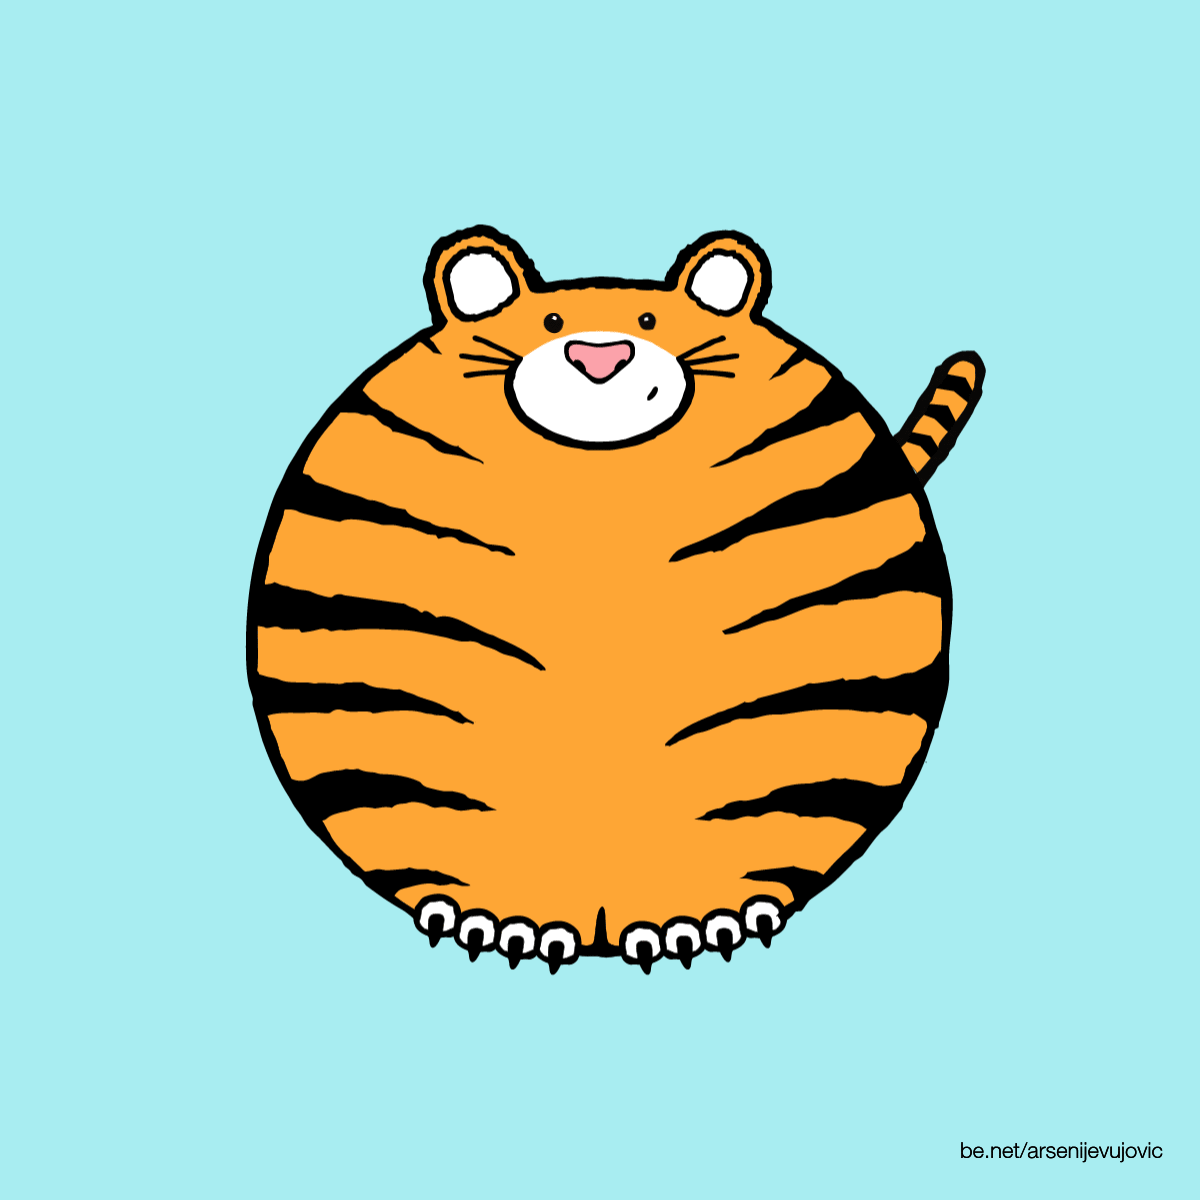 zoo,illustration,dribbblers,characterdesign,animation,animals,animal,motion,graphics,graphic,wild,motiongraphics,tigers,dribbble